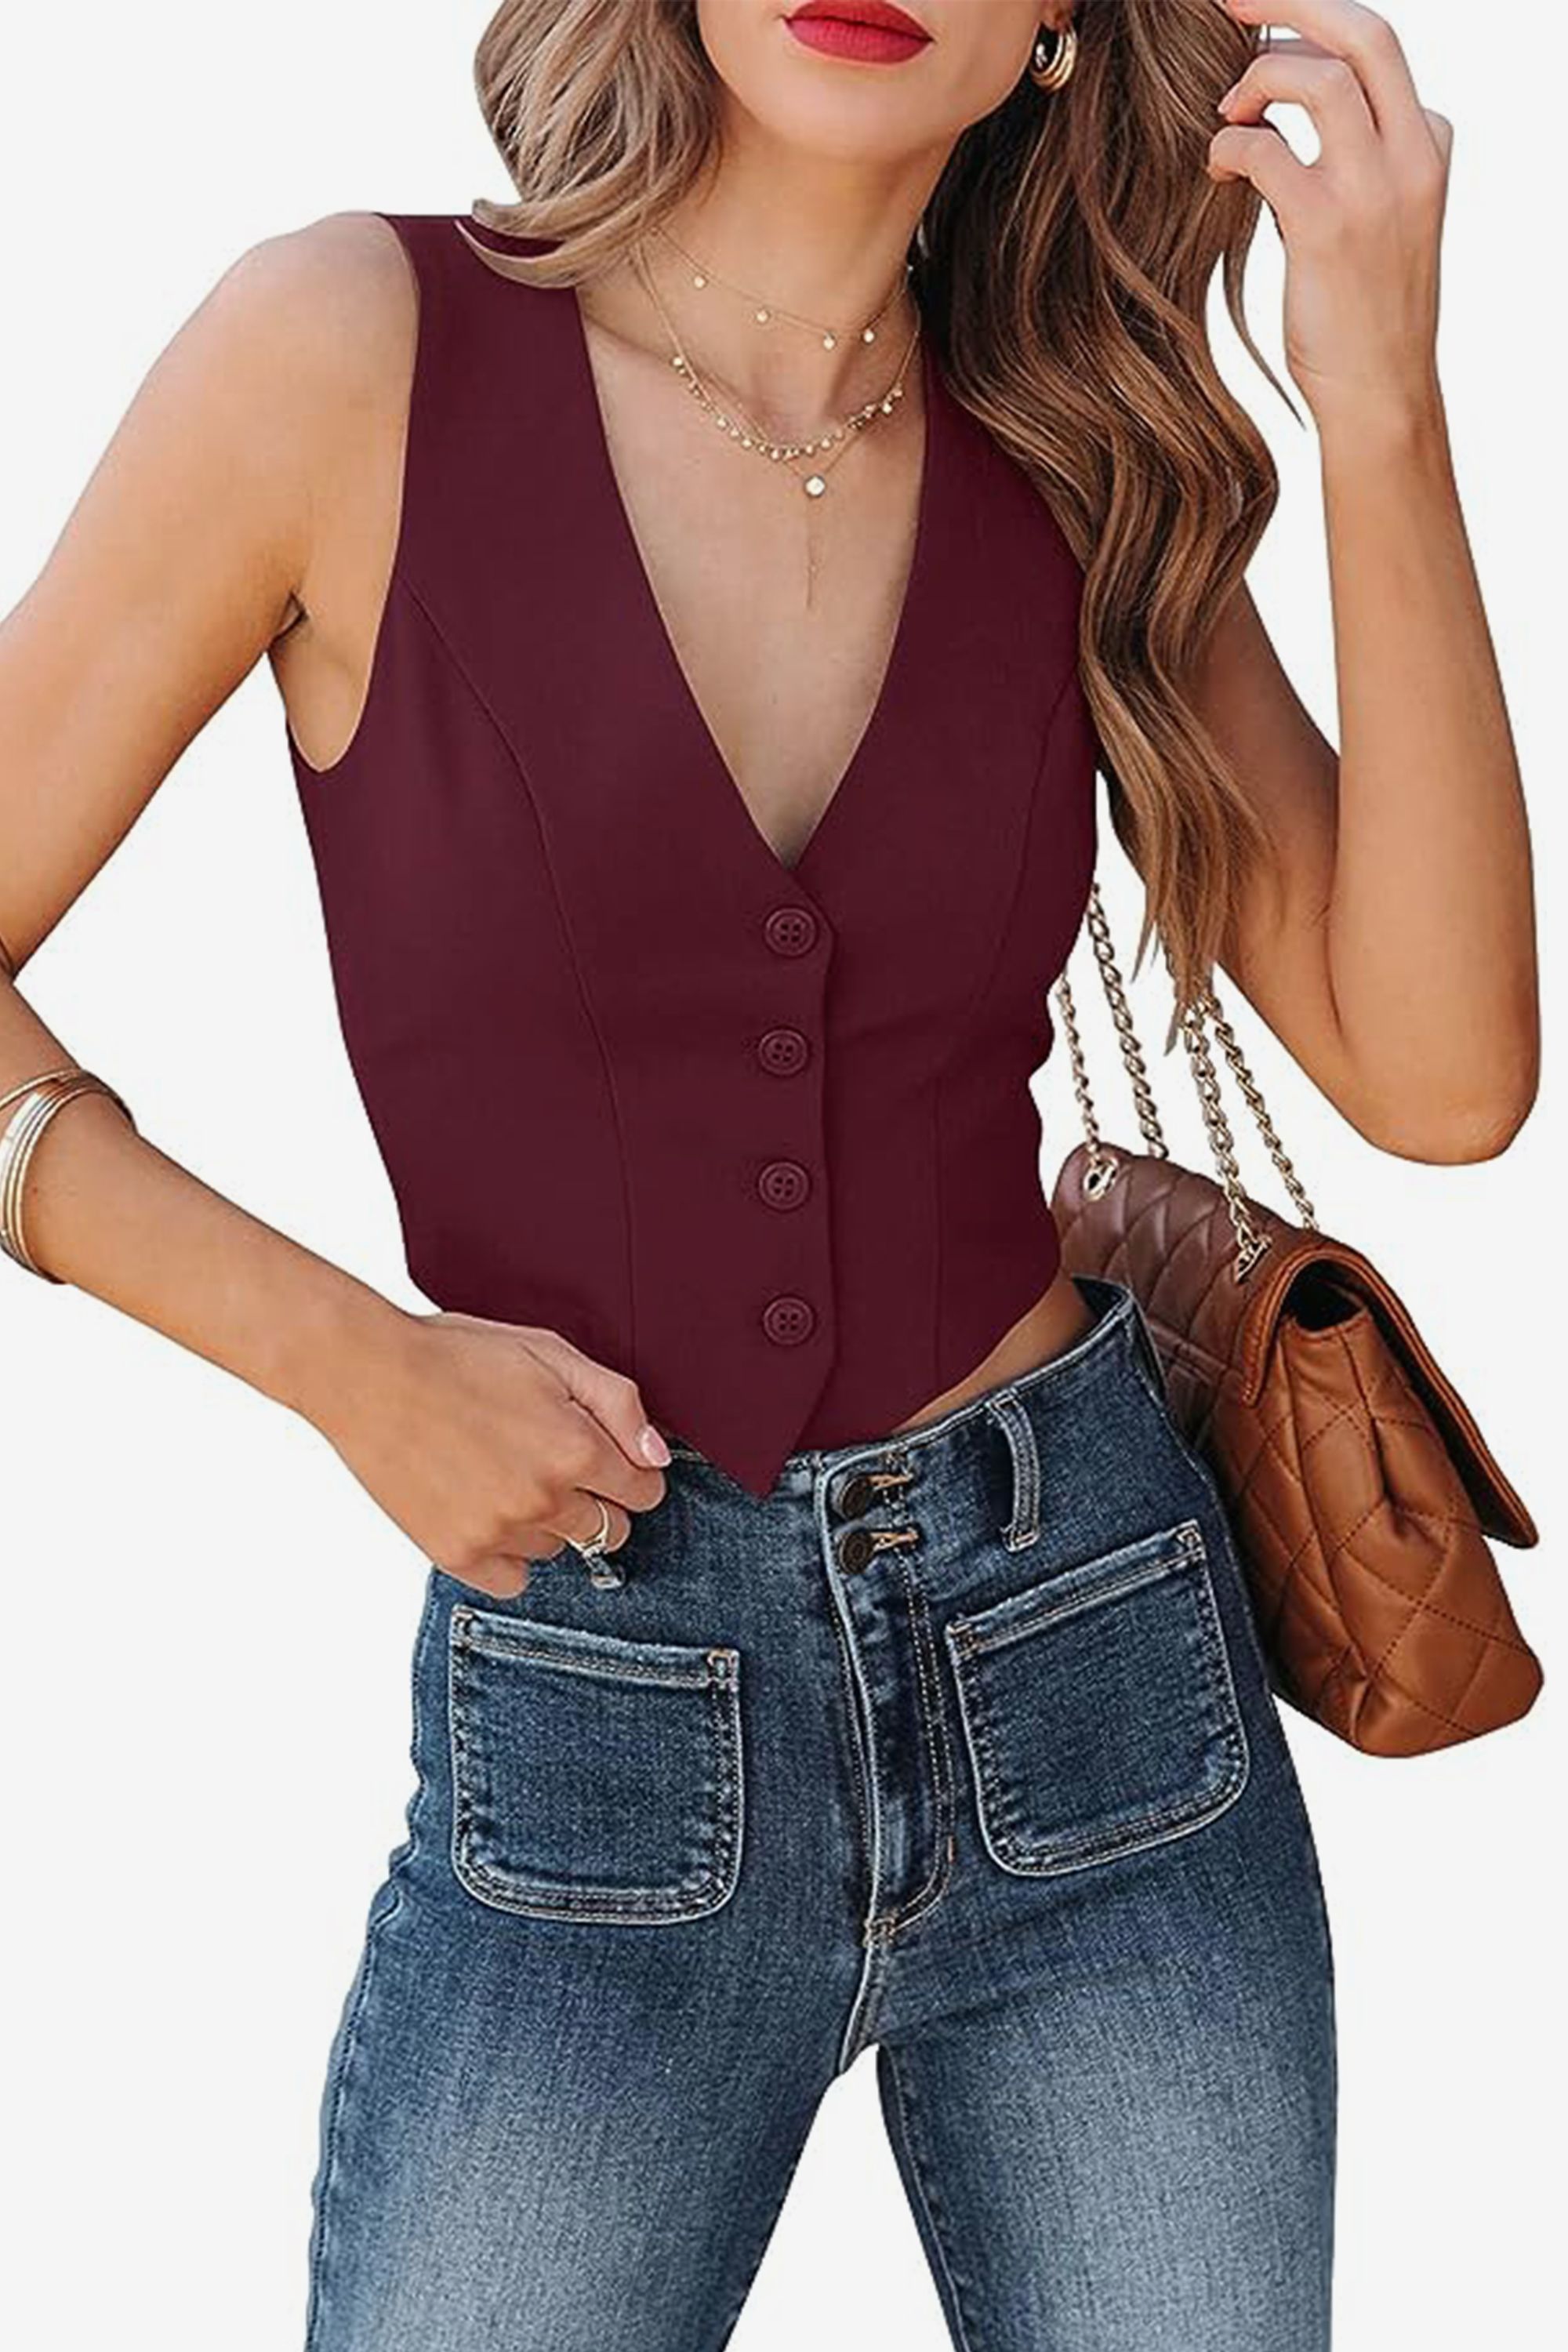 Women's Business Button Up Sleeveless Vests